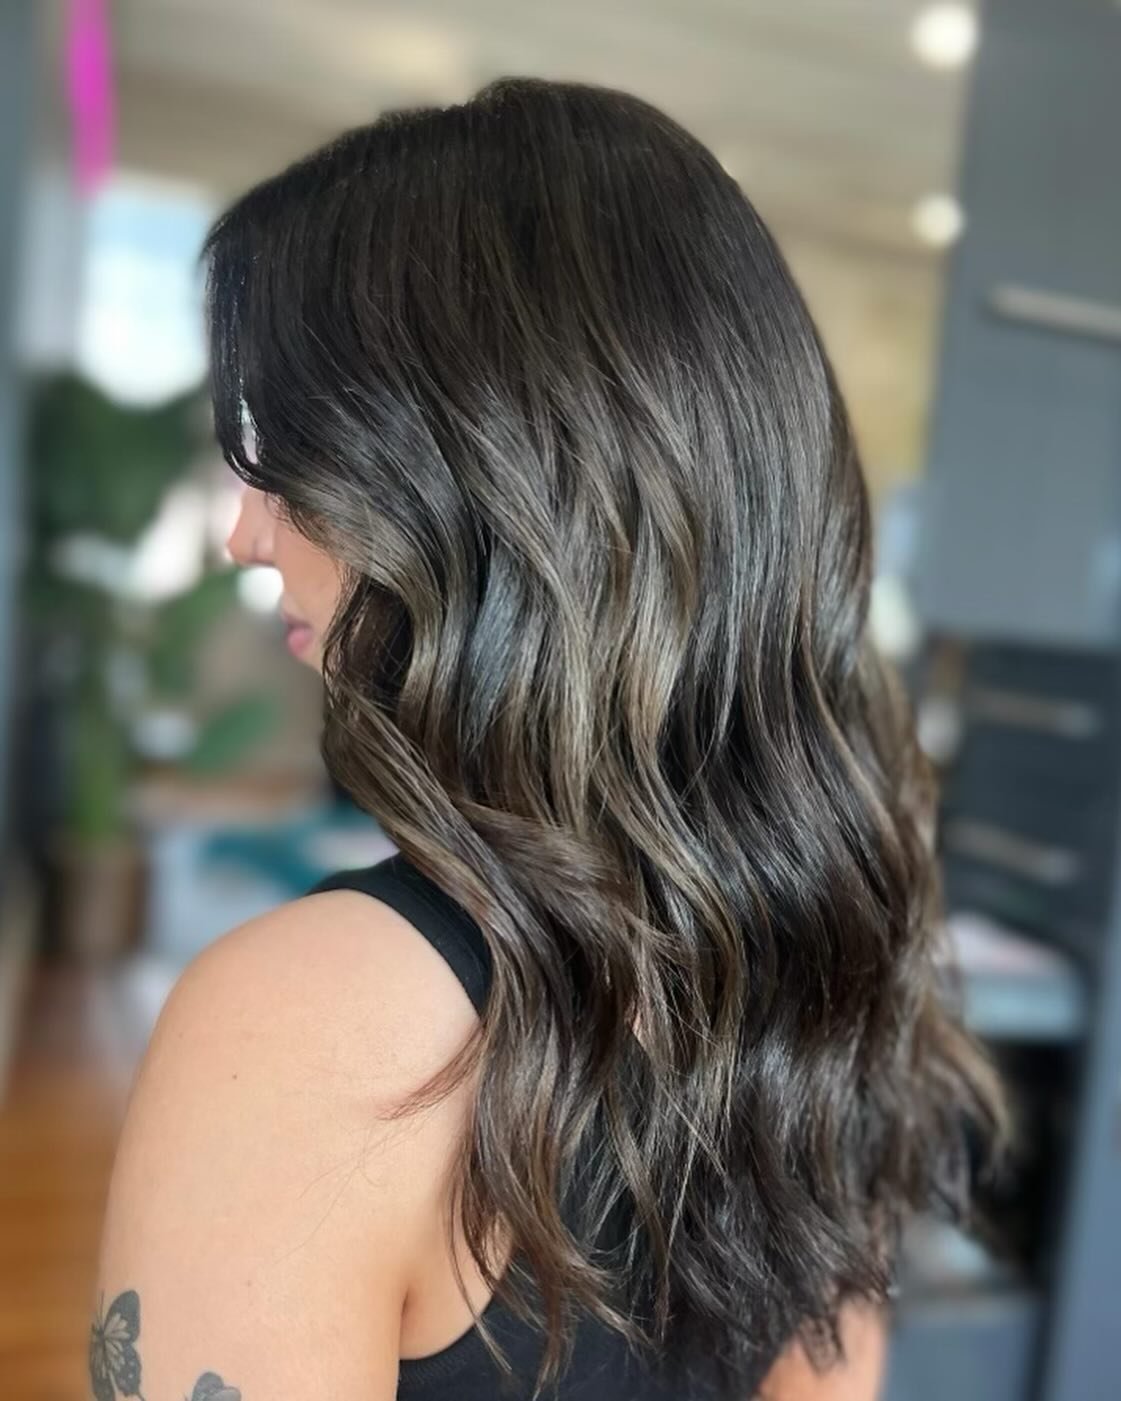 Bringing a whole new meaning to &lsquo;bold&rsquo; with this espresso-inspired masterpiece! ☕️🤎🖤✨

#espresso #espressohair #darkhairbalayage #darkhairdontcare